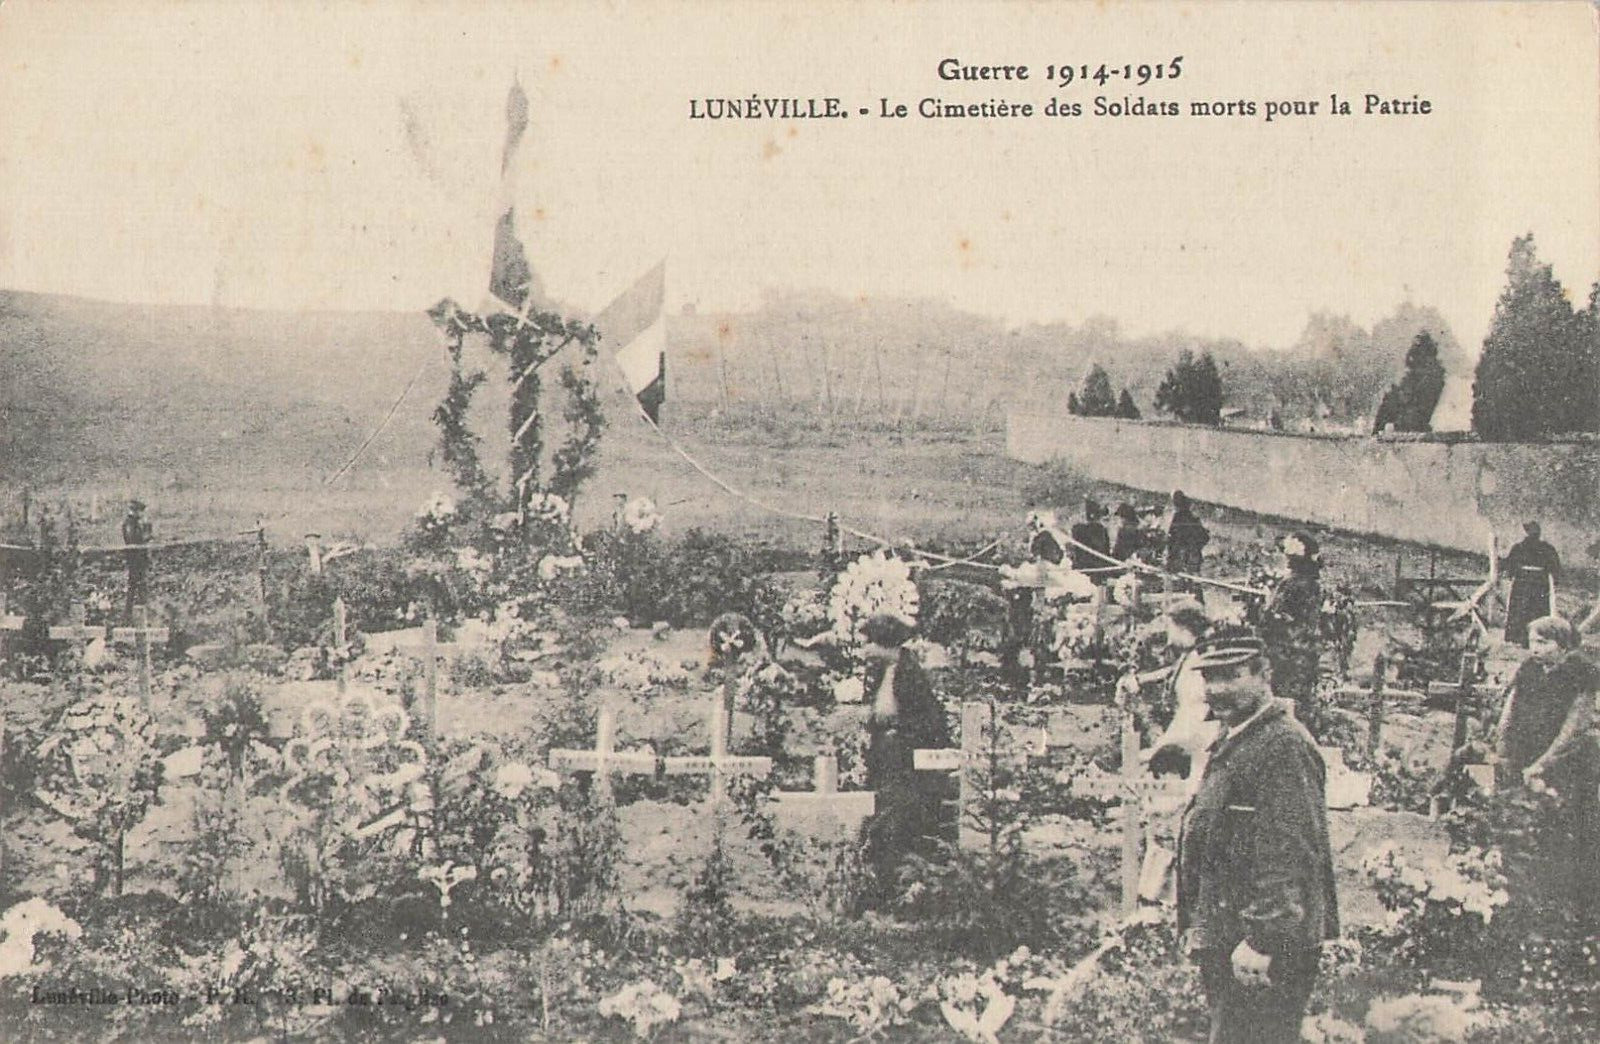 CP WAR 1914-1915 LUNEVILLE CEMETERY SOLDIERS DEAD FOR THE HOMELAND - 40038